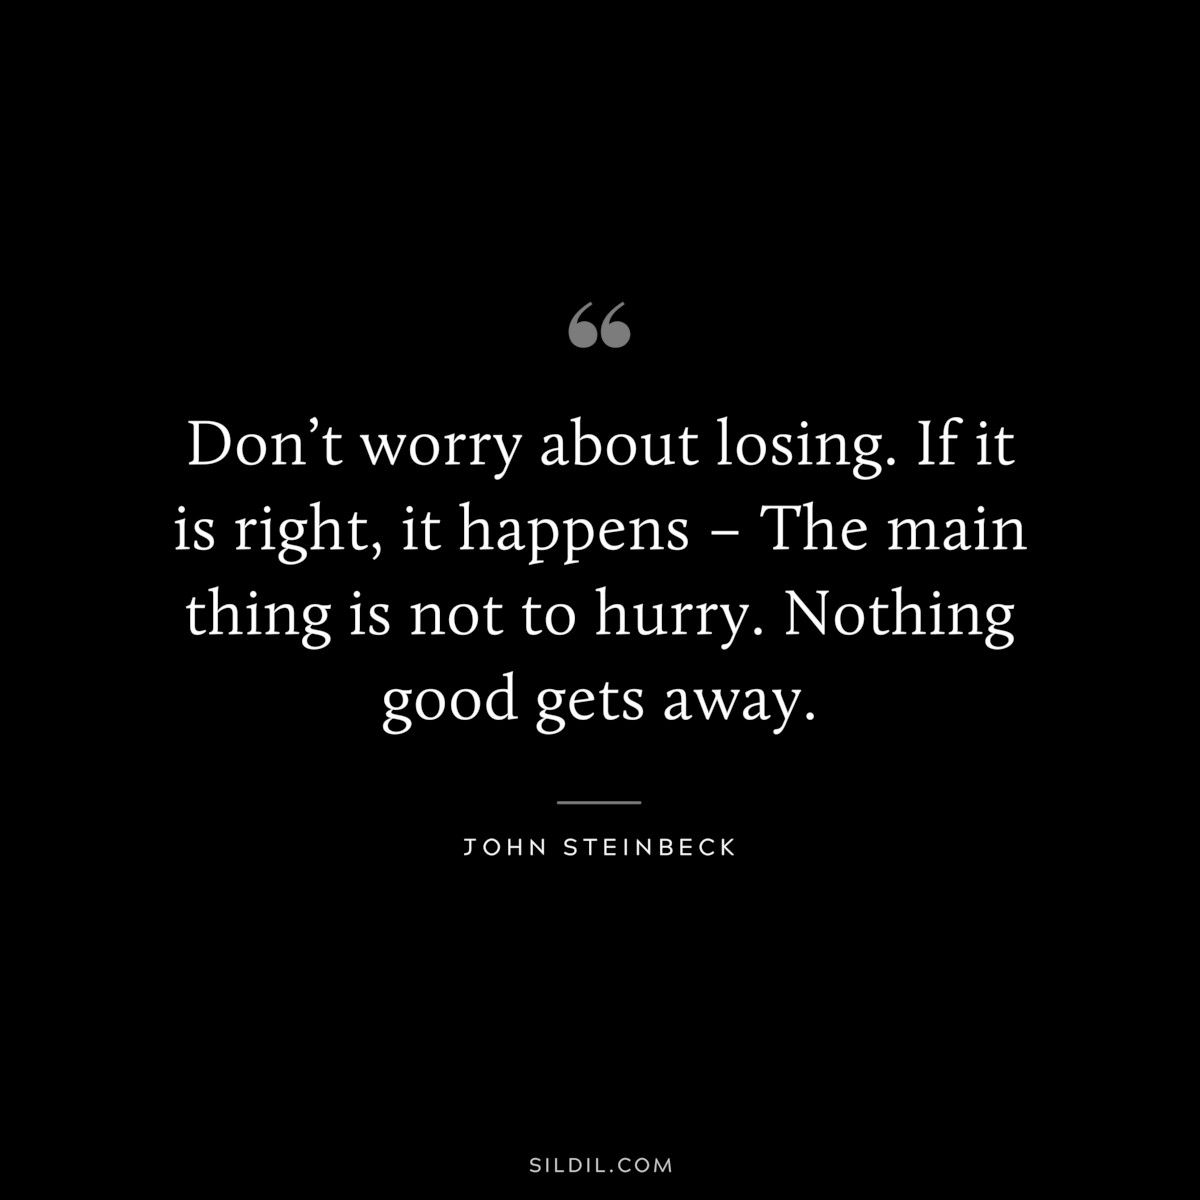 Don’t worry about losing. If it is right, it happens – The main thing is not to hurry. Nothing good gets away.― John Steinbeck